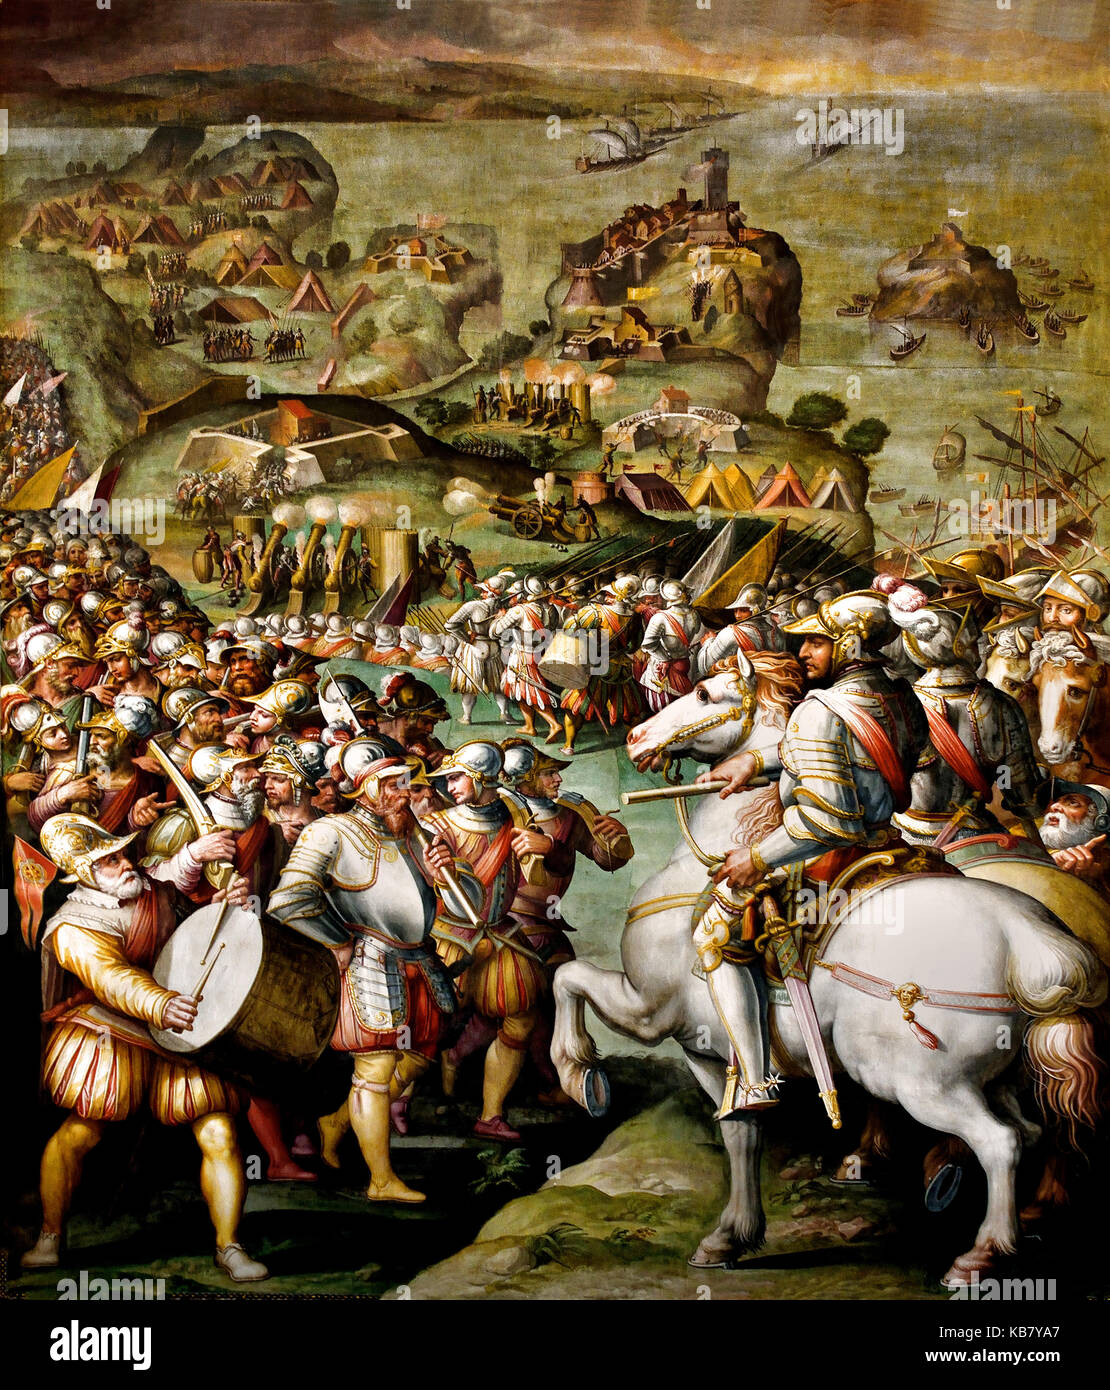 Capture of Porto Ercole by Giorgio Vasari 1568/1570 ( Salone dei Cinquecento ) The Palazzo Vecchio Florence Italy (After the taking of Siena and the Medicean-Imperial troops entering the city on the 21st of April 1555, several Sienese, French and Florentine exiles found refuge in Porto Ercole ) Stock Photo